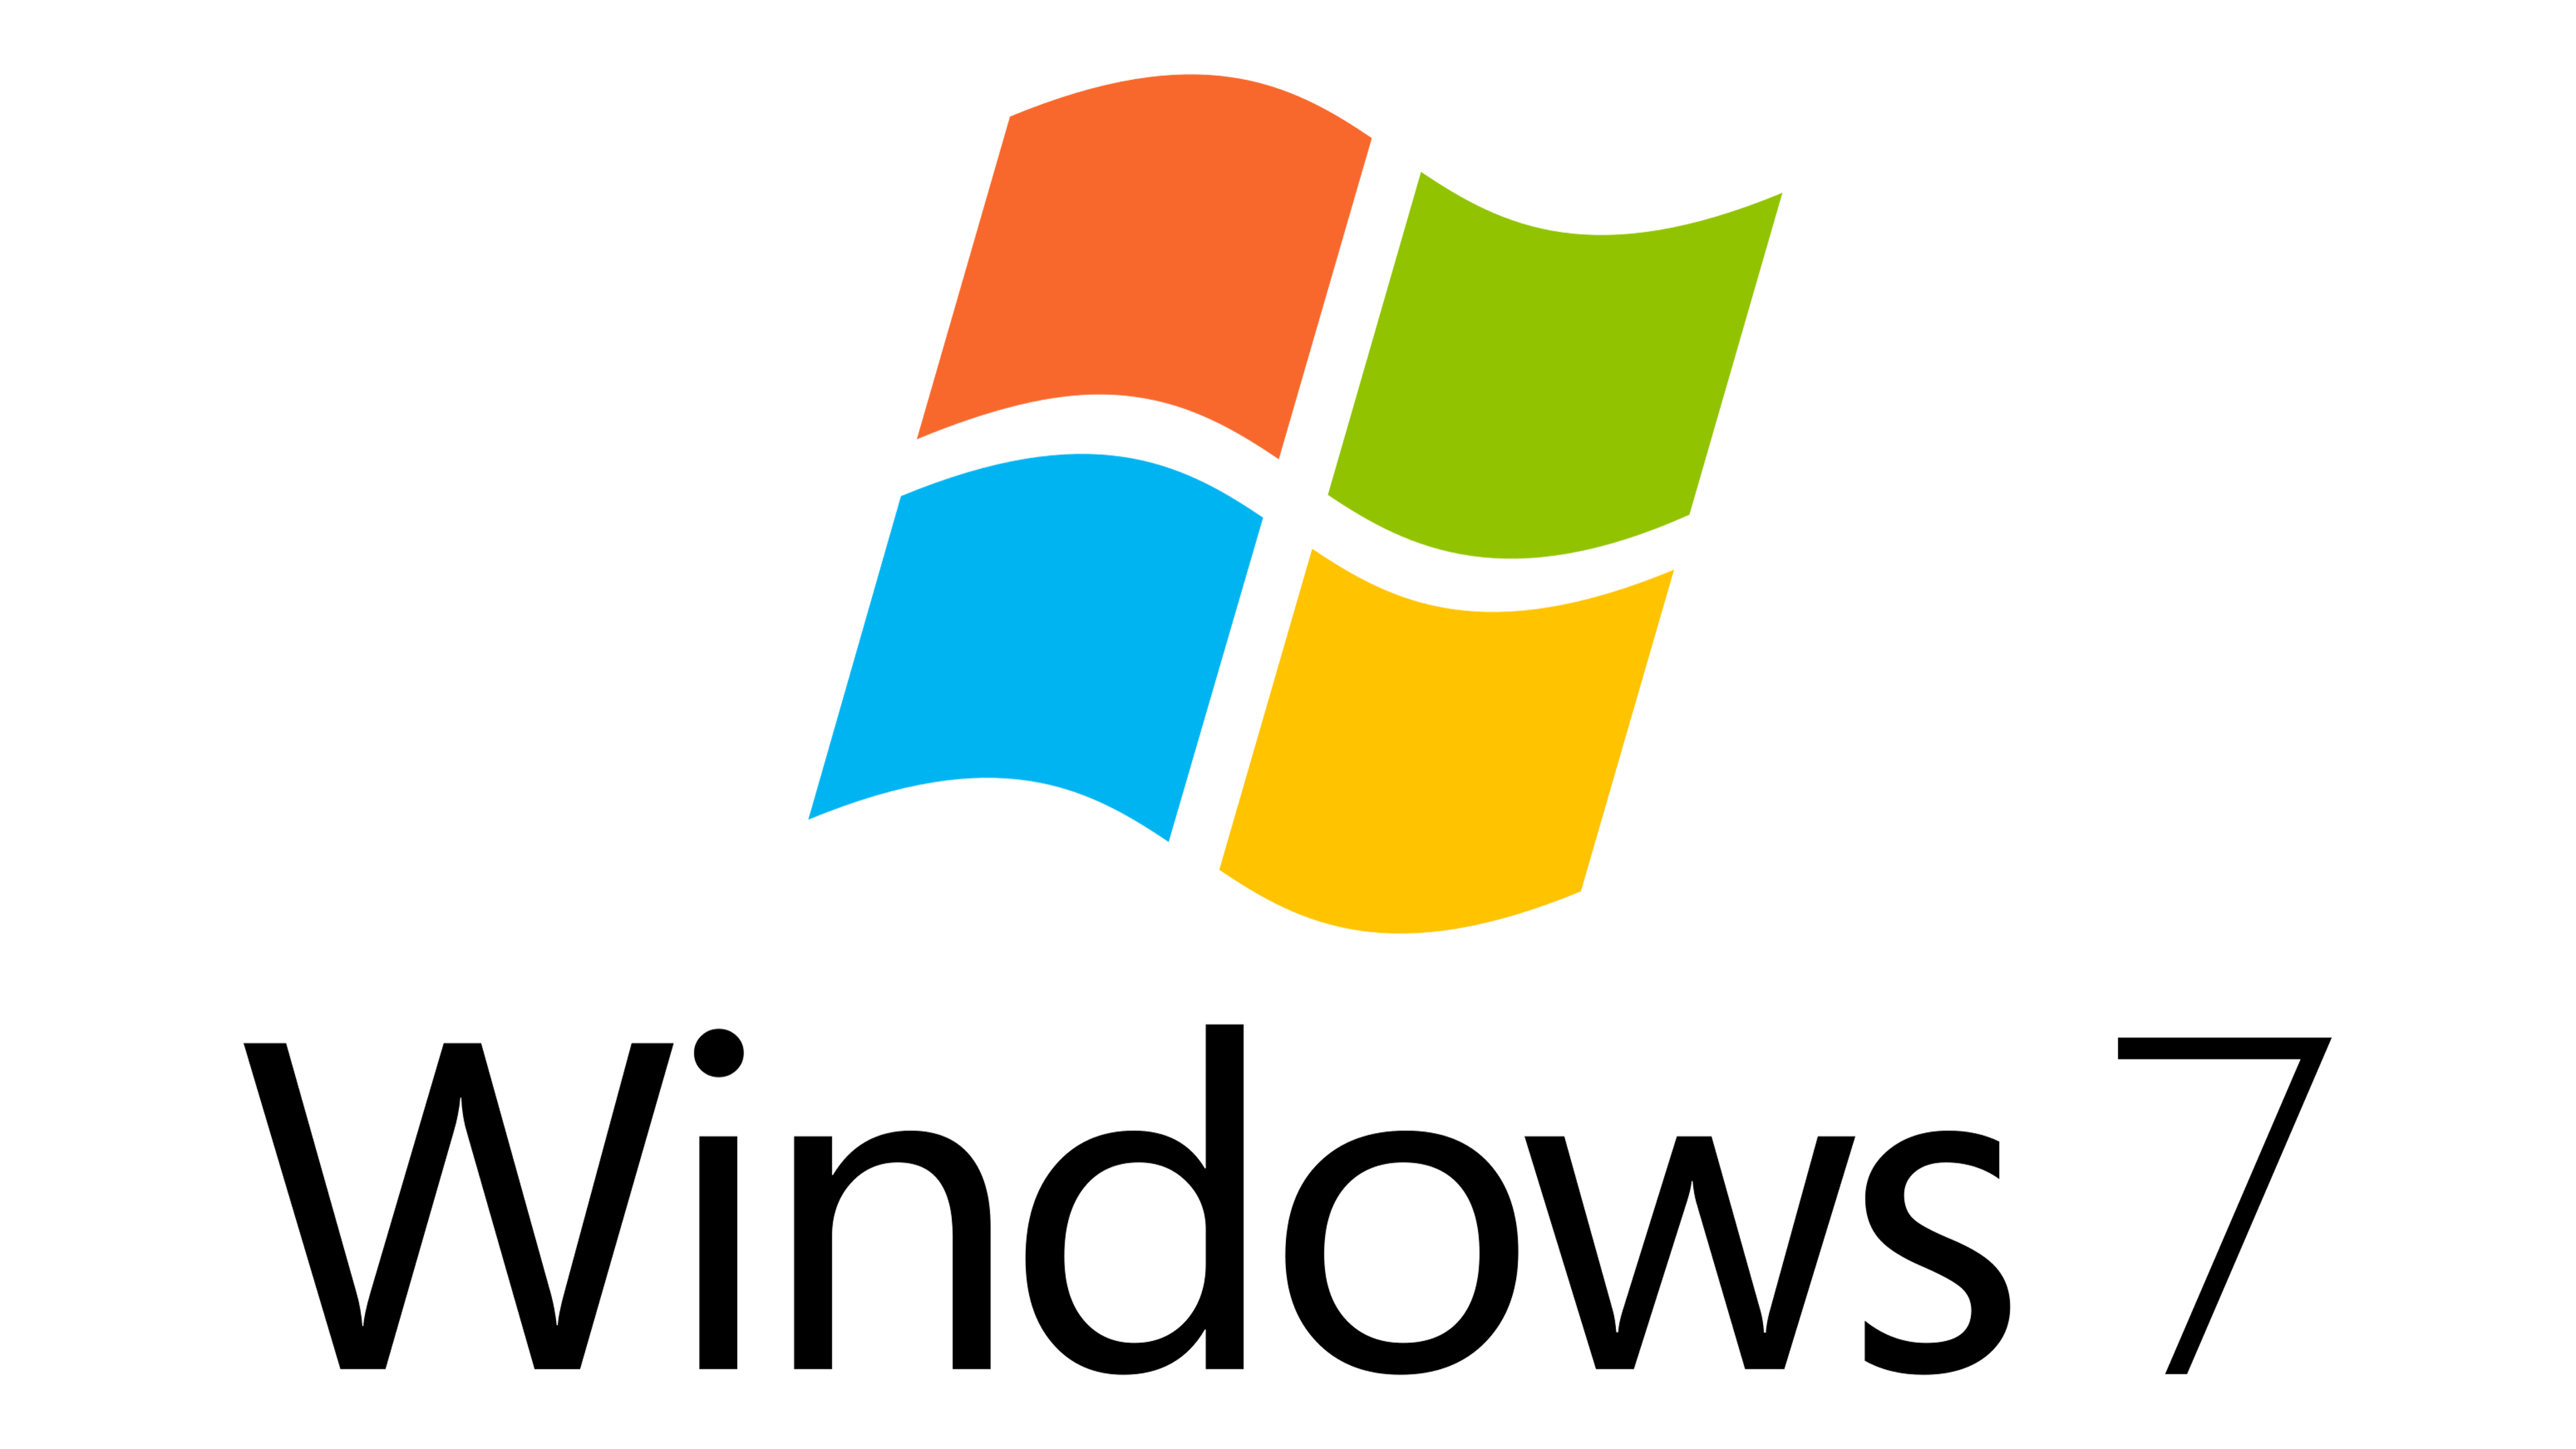 Windows Logo And Symbol Meaning History Png Brand